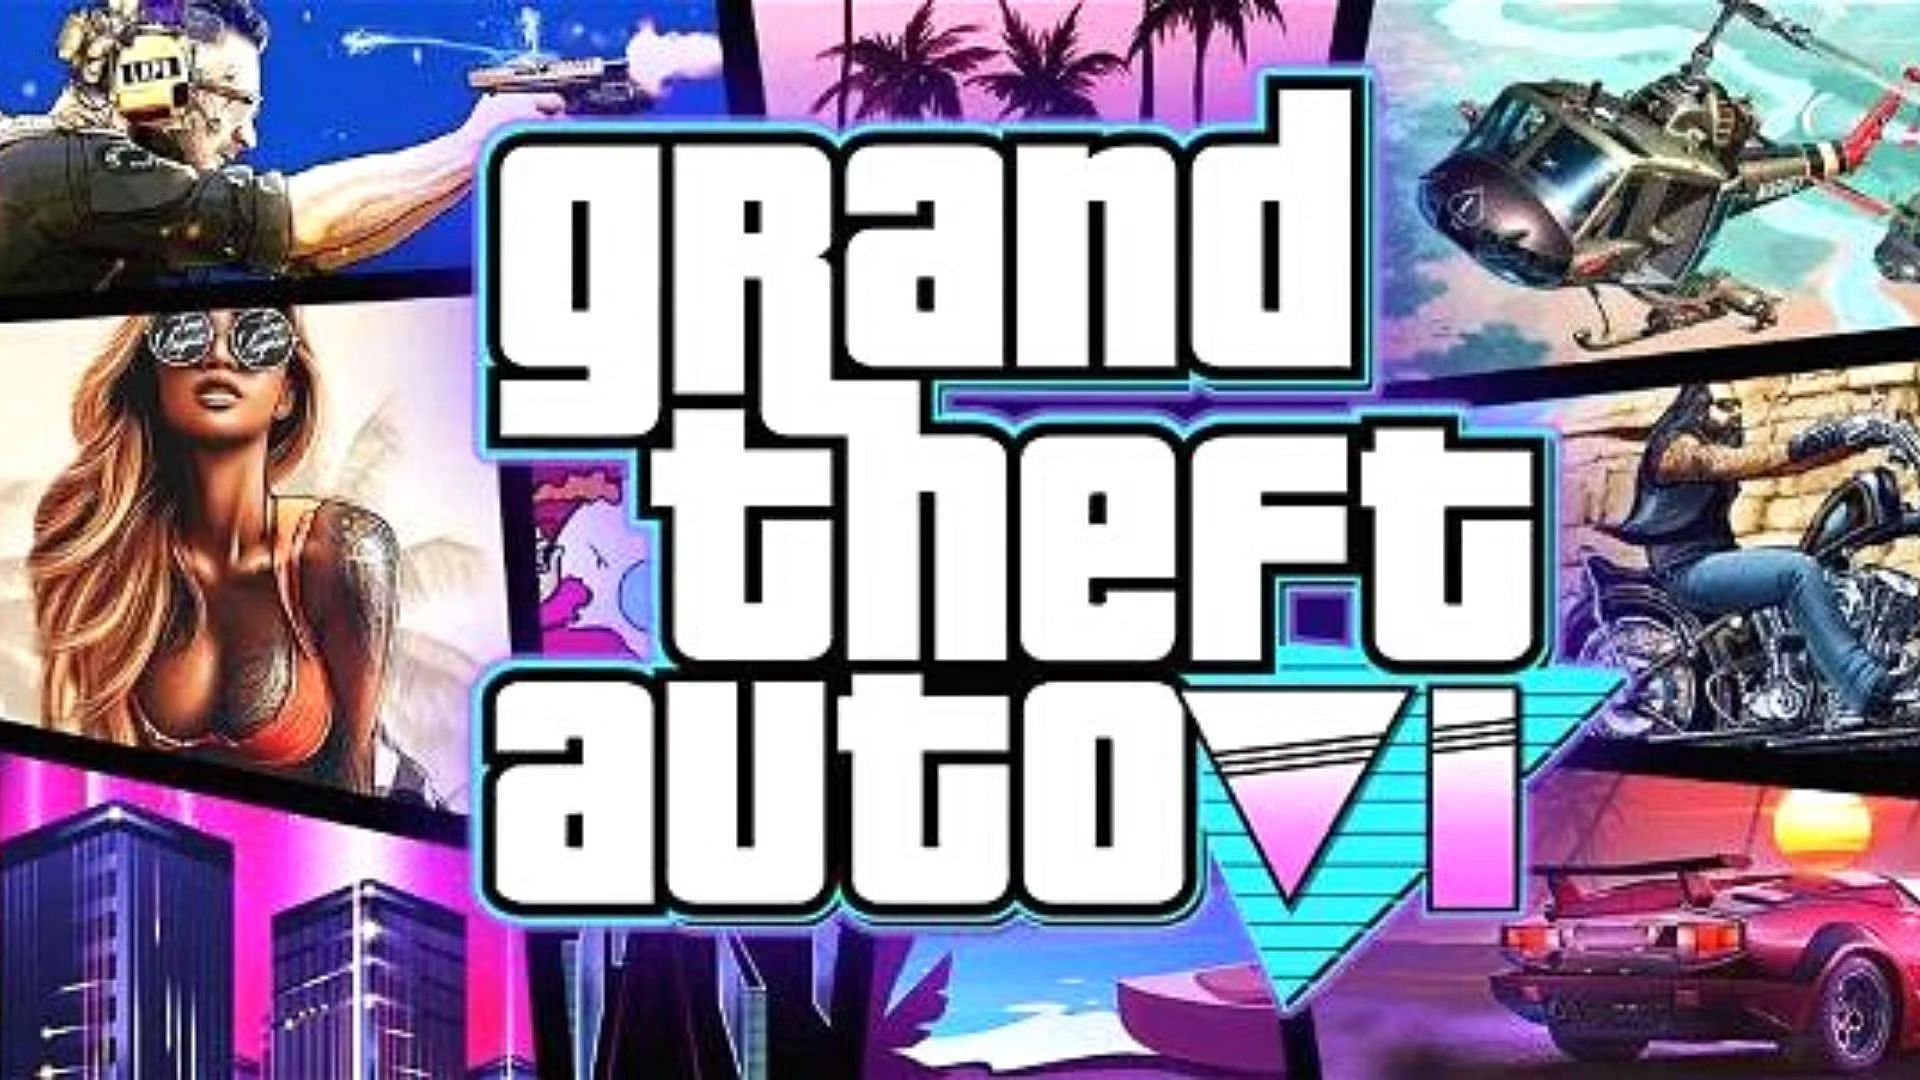 GTA 6 will be the 16th game in the popular franchise (Image via Sportskeeda)